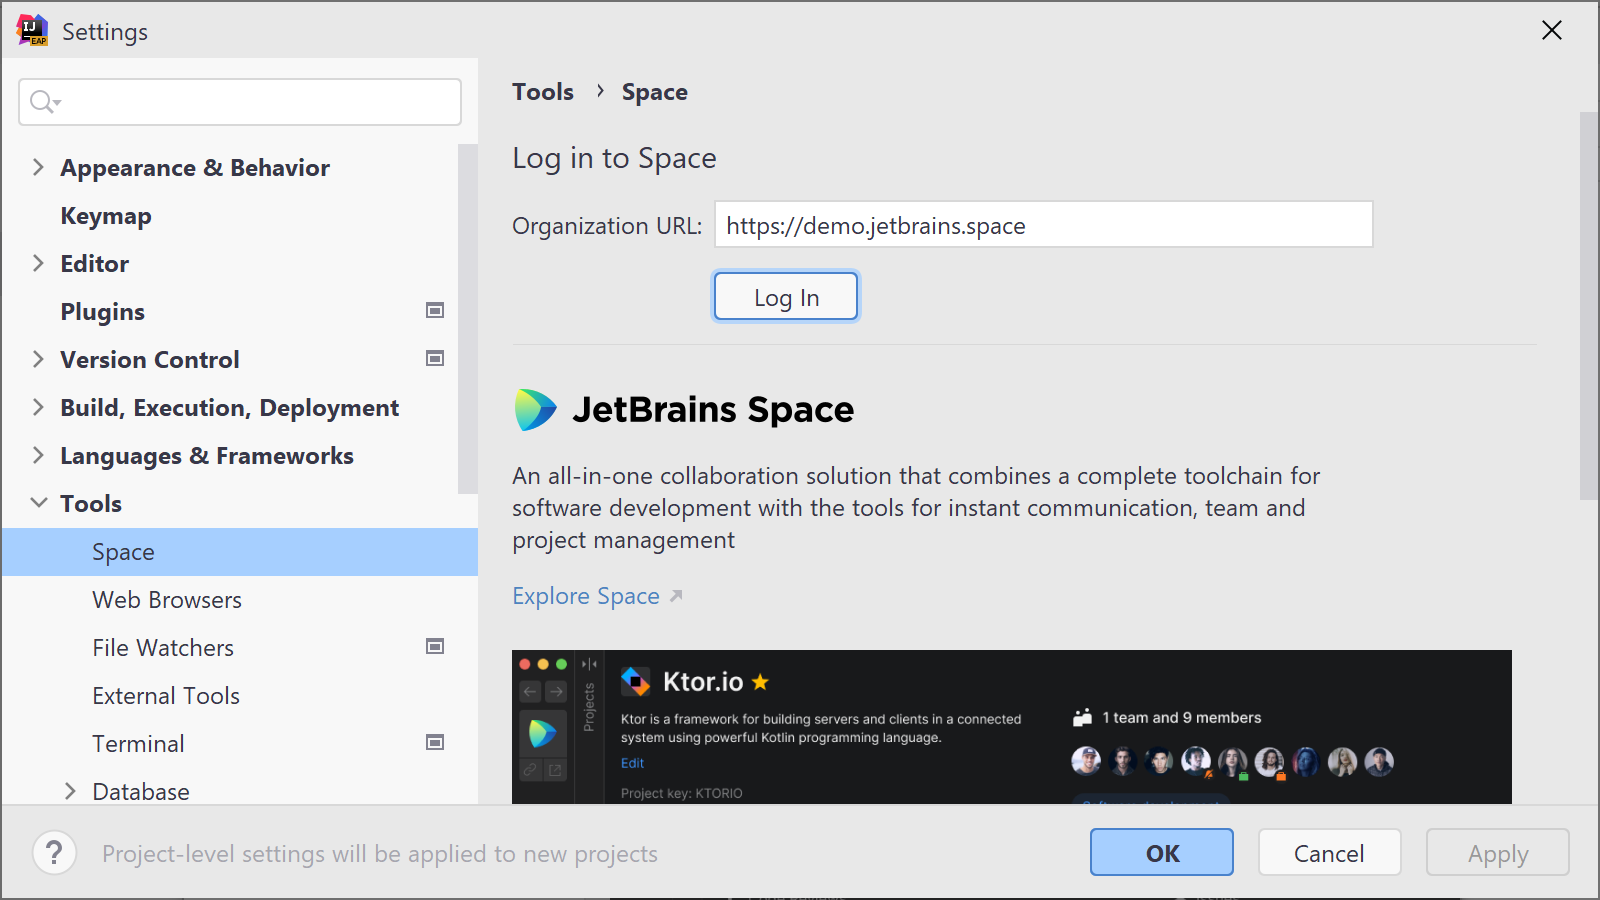 Log in to Space from the IDE